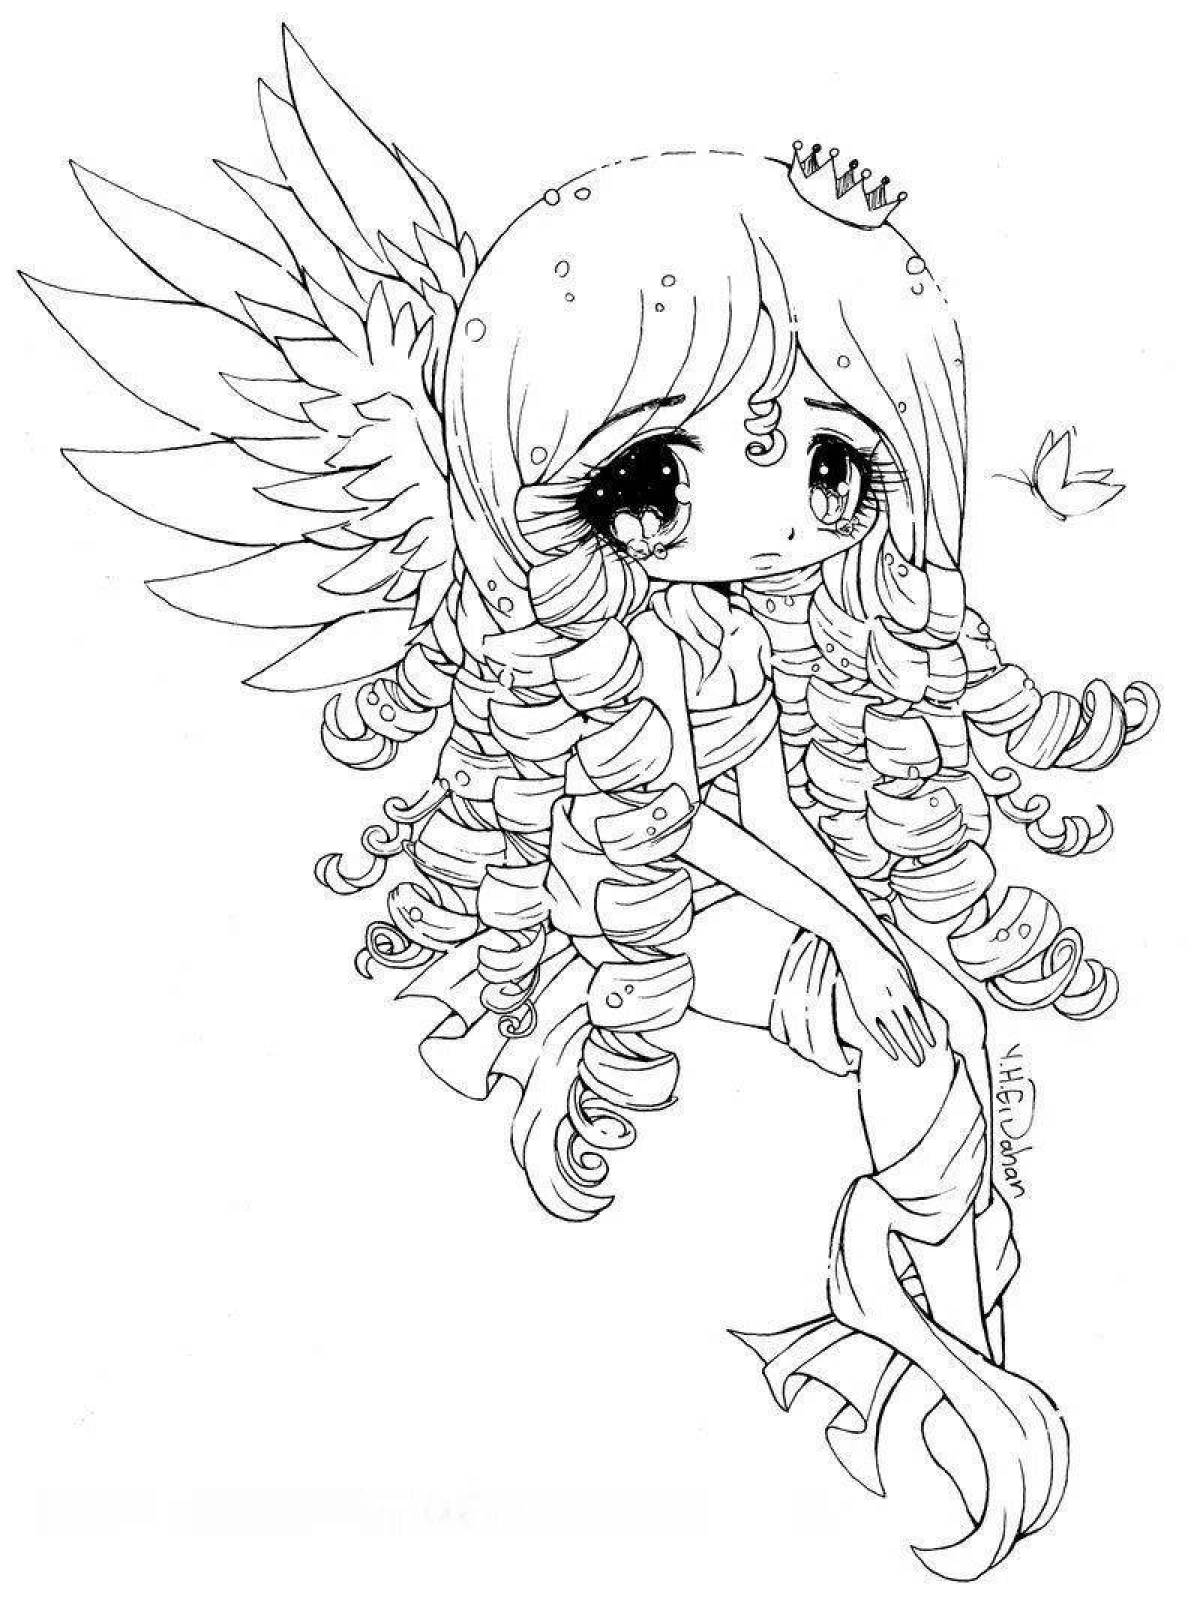 Delightful coloring girl with wings